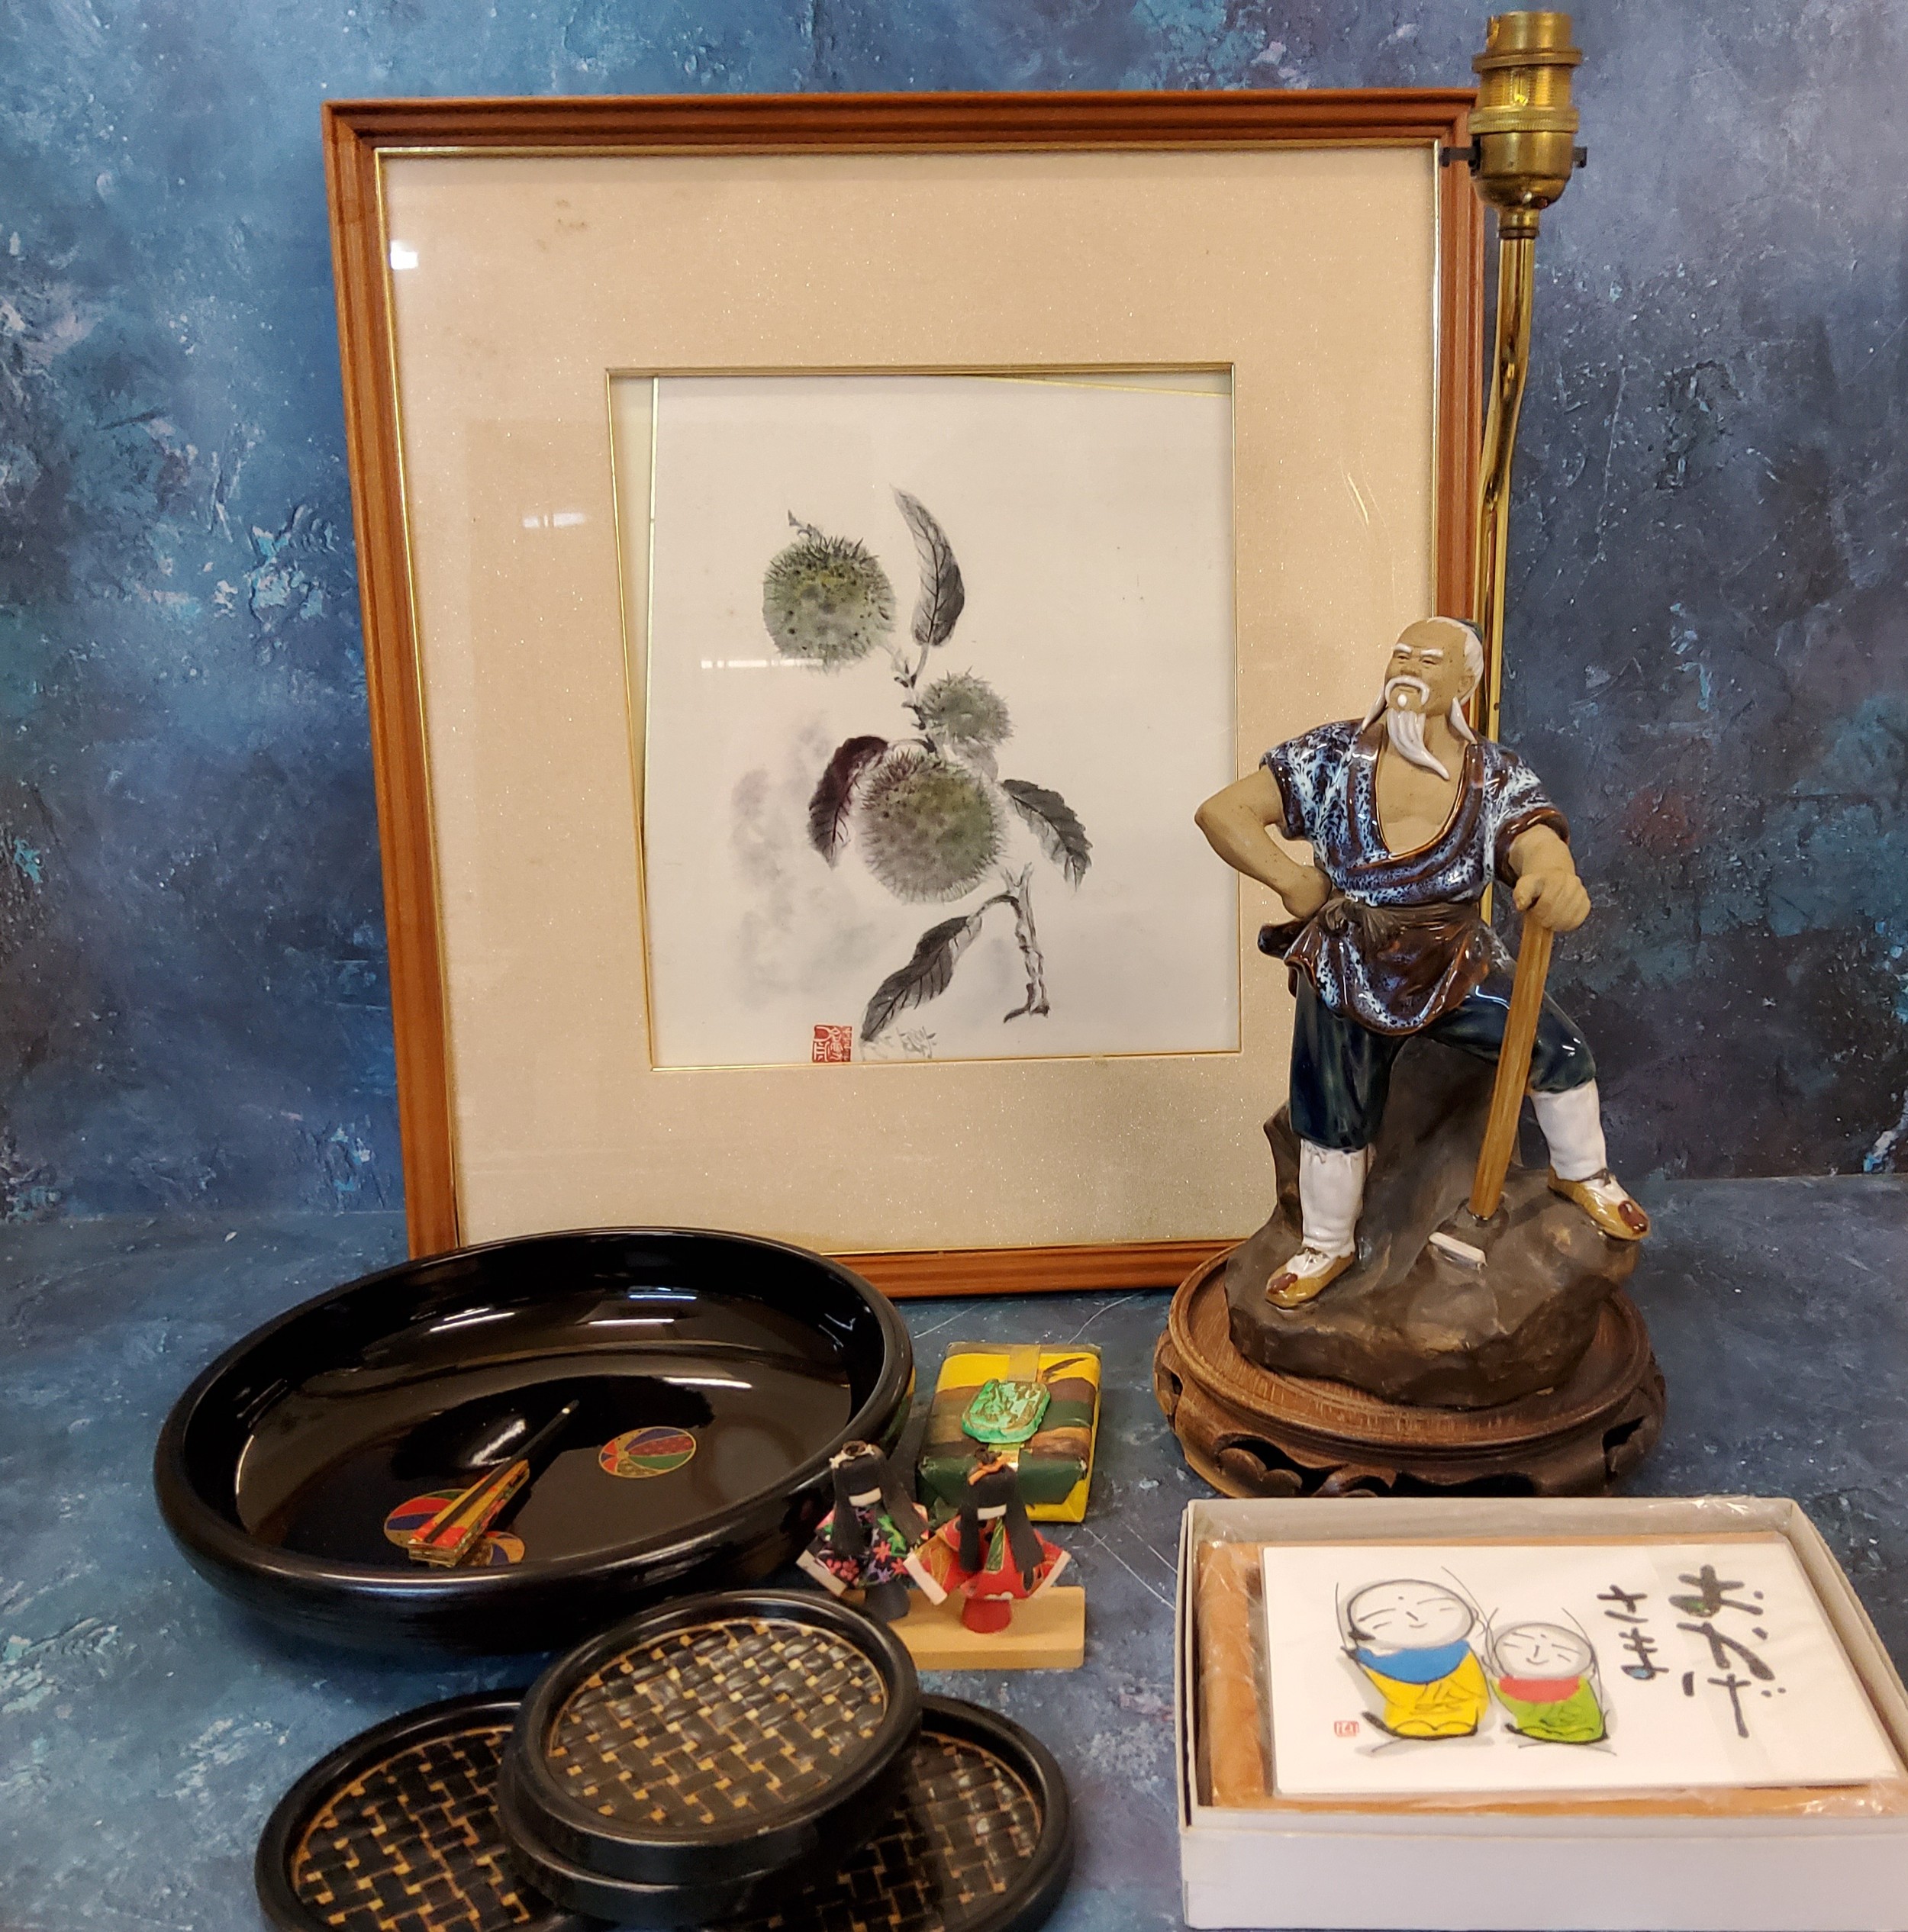 Orientental - a Japanese table lamp;  a wood block printed on a branch, framed;  coasters;  etc